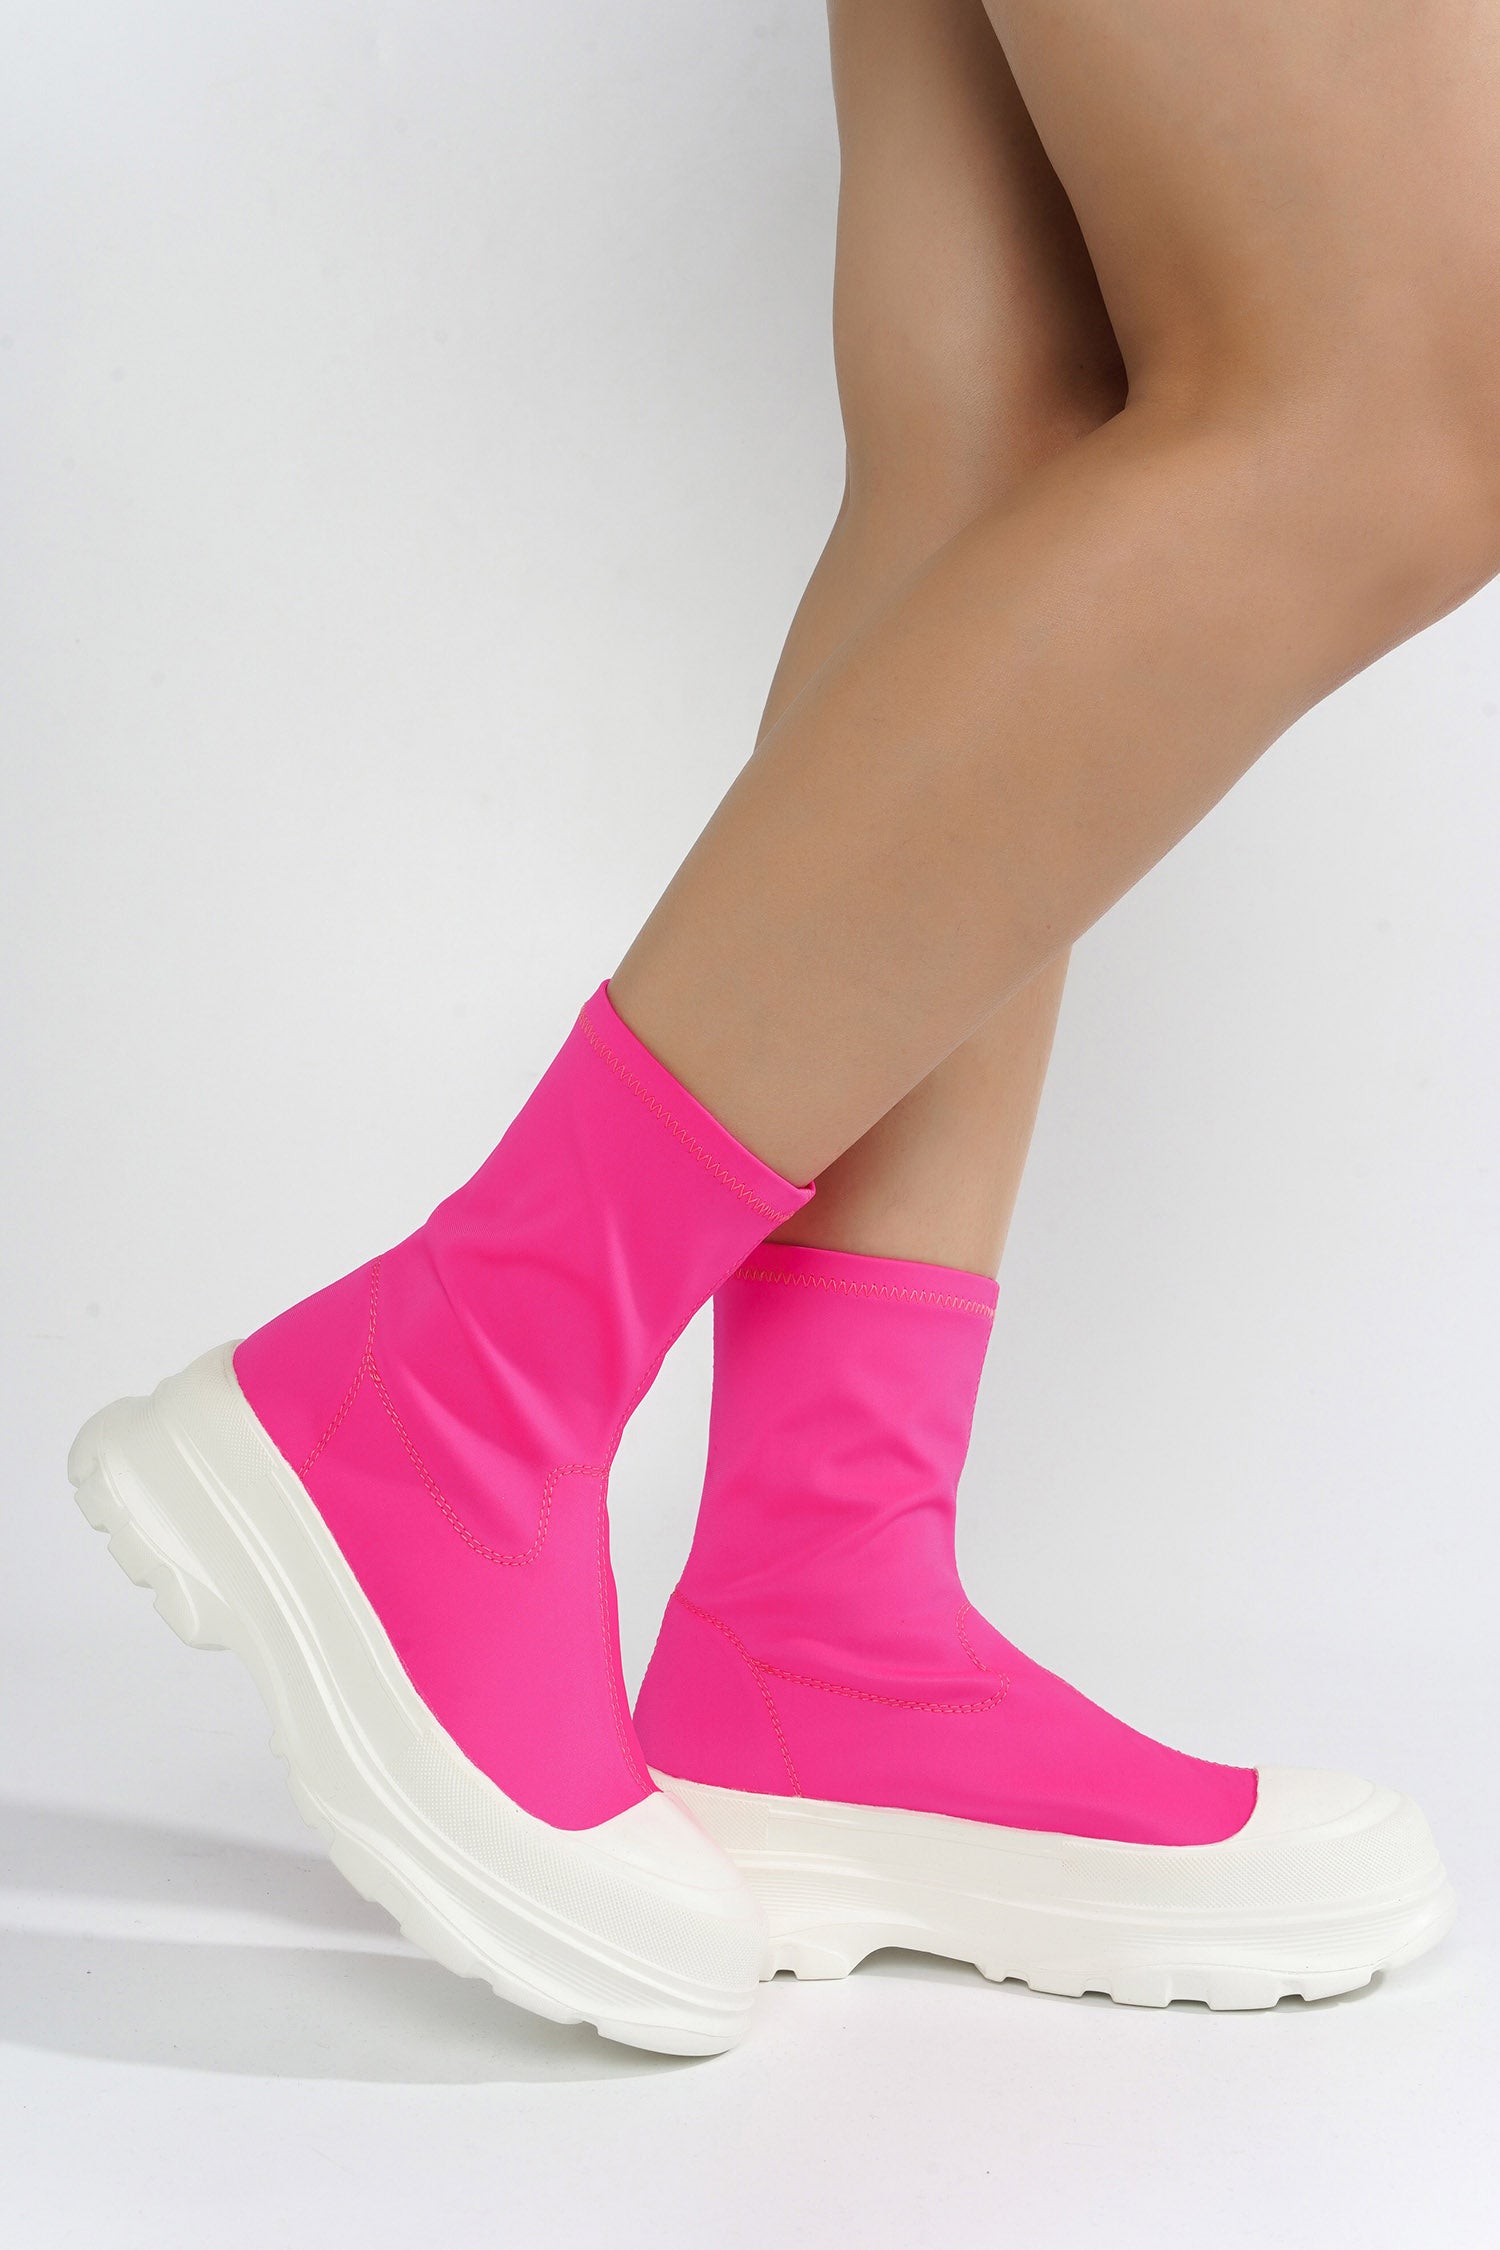 Cape Robbin - GIG - PINK - SNEAKERS